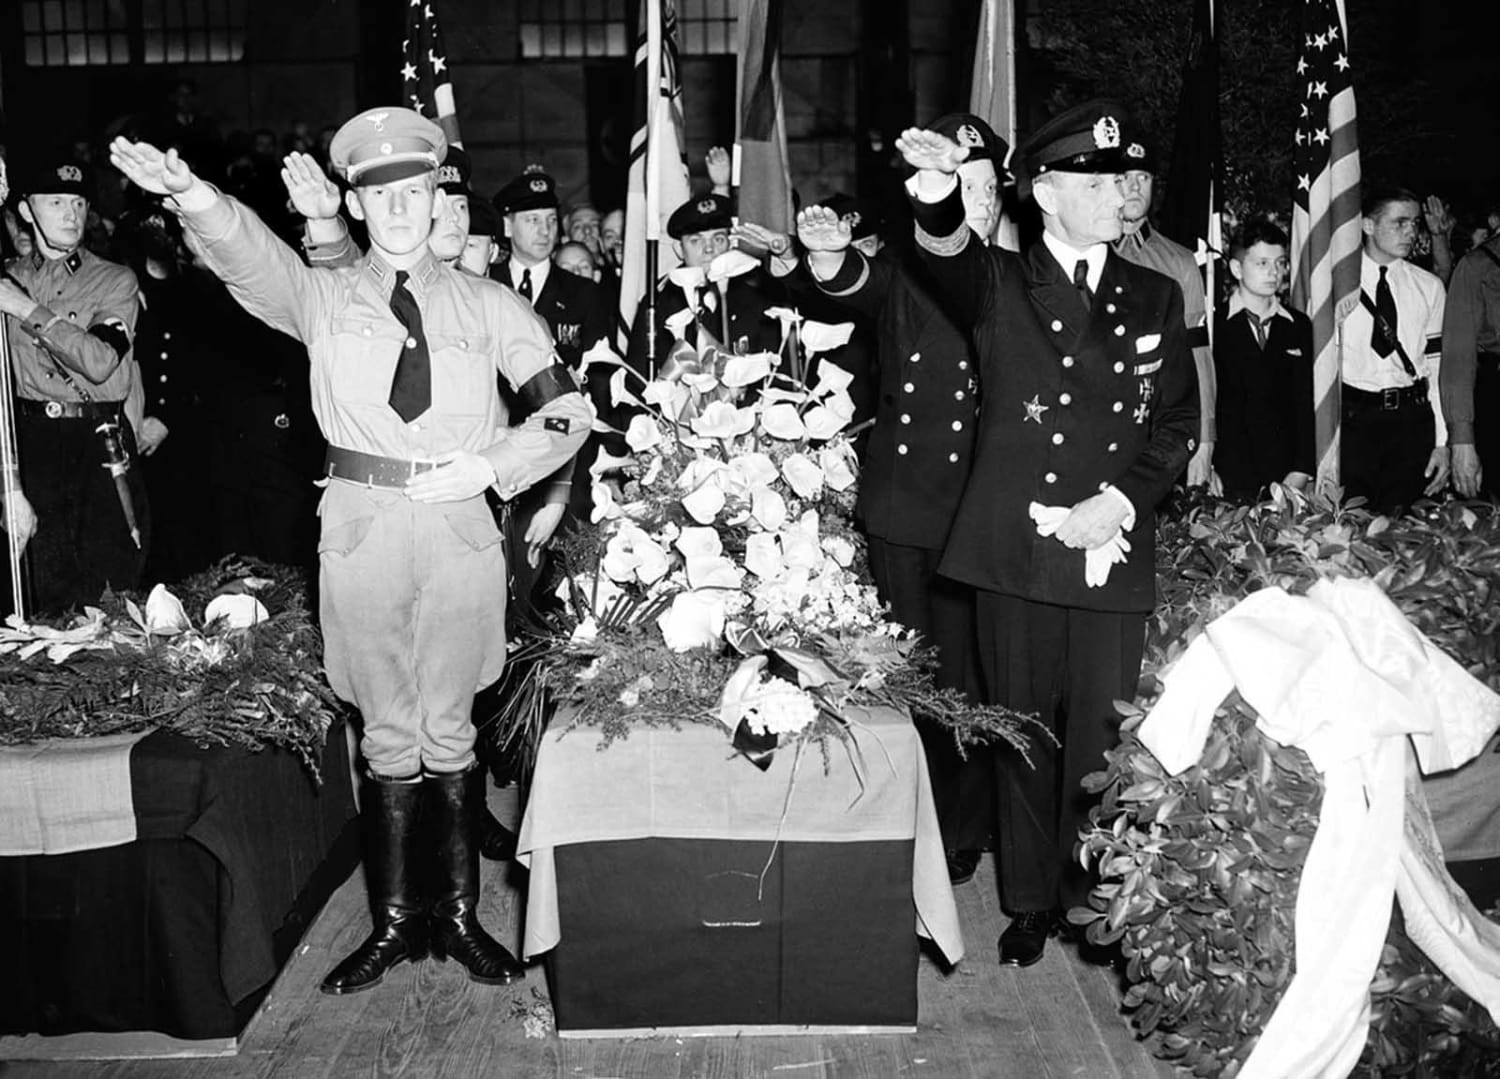 German soldiers give the salute as they stand beside the casket of Capt. Ernest A. Lehmann, former commander of the Zeppelin Hindenburg, New York City, May 11 1937